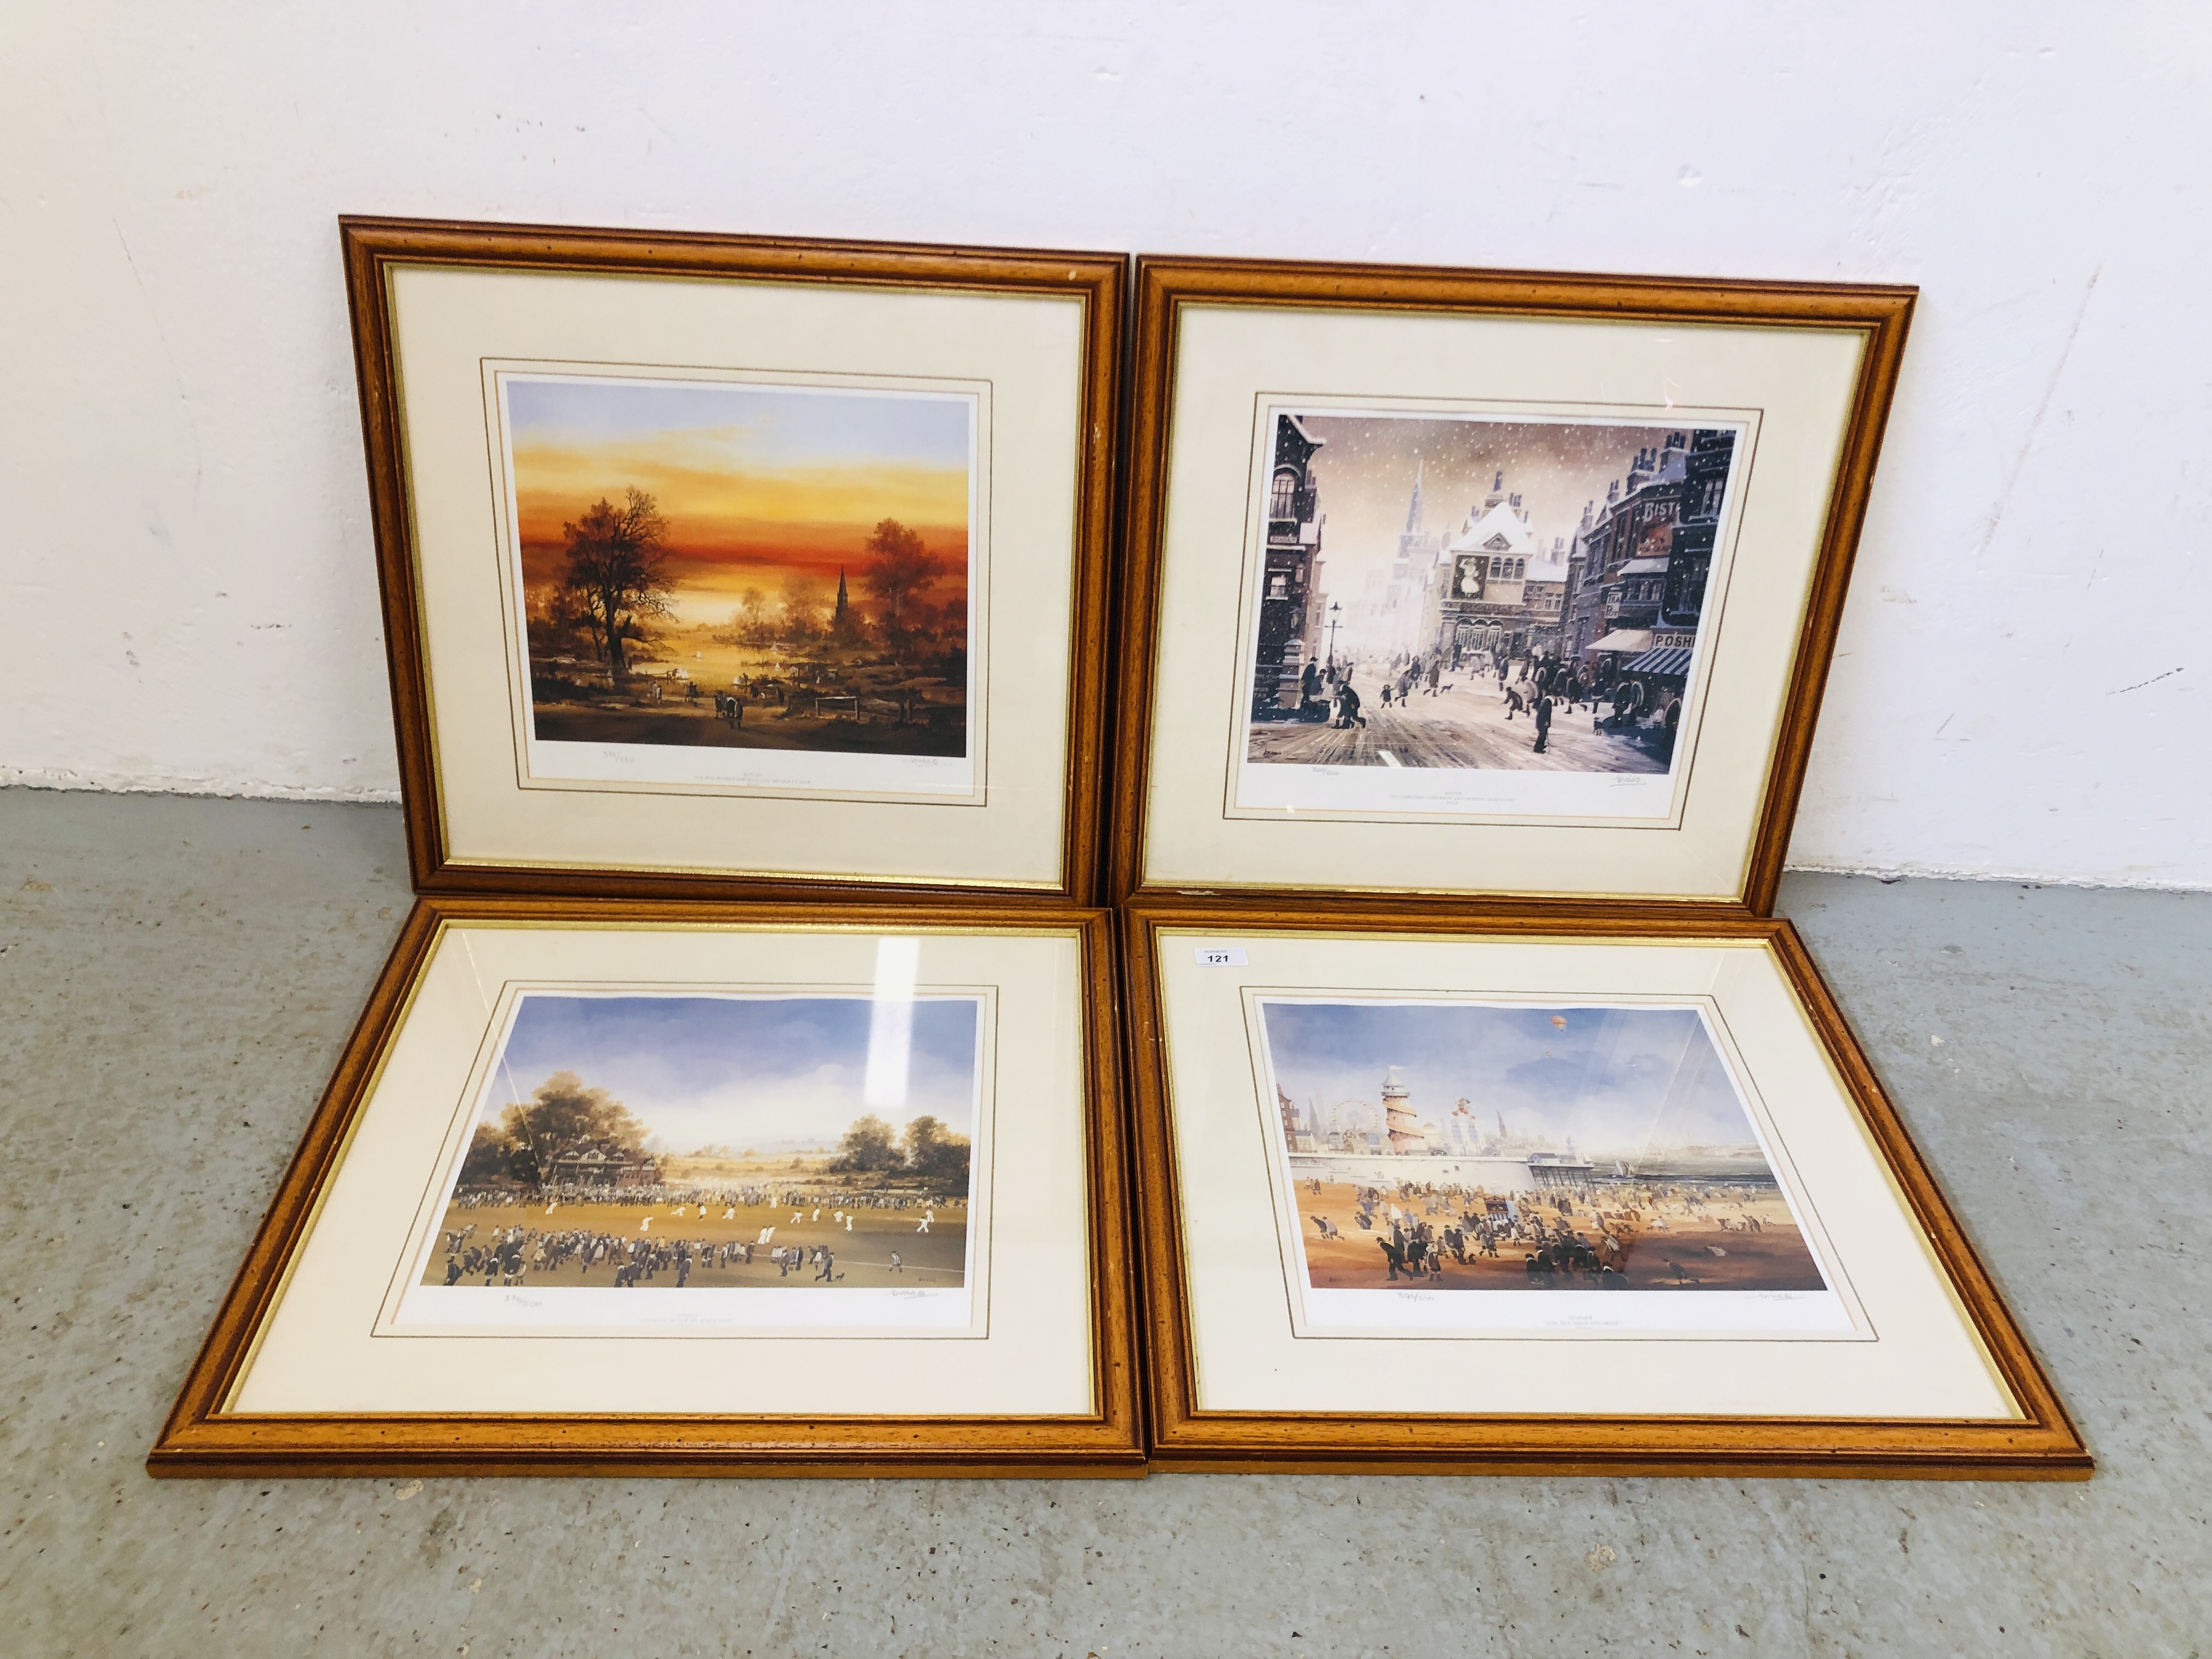 A SET OF 4 LIMITED EDITION FOUR SEASONS BRAAQ PRINTS WIDTH 32.5CM. HEIGHT 30CM.